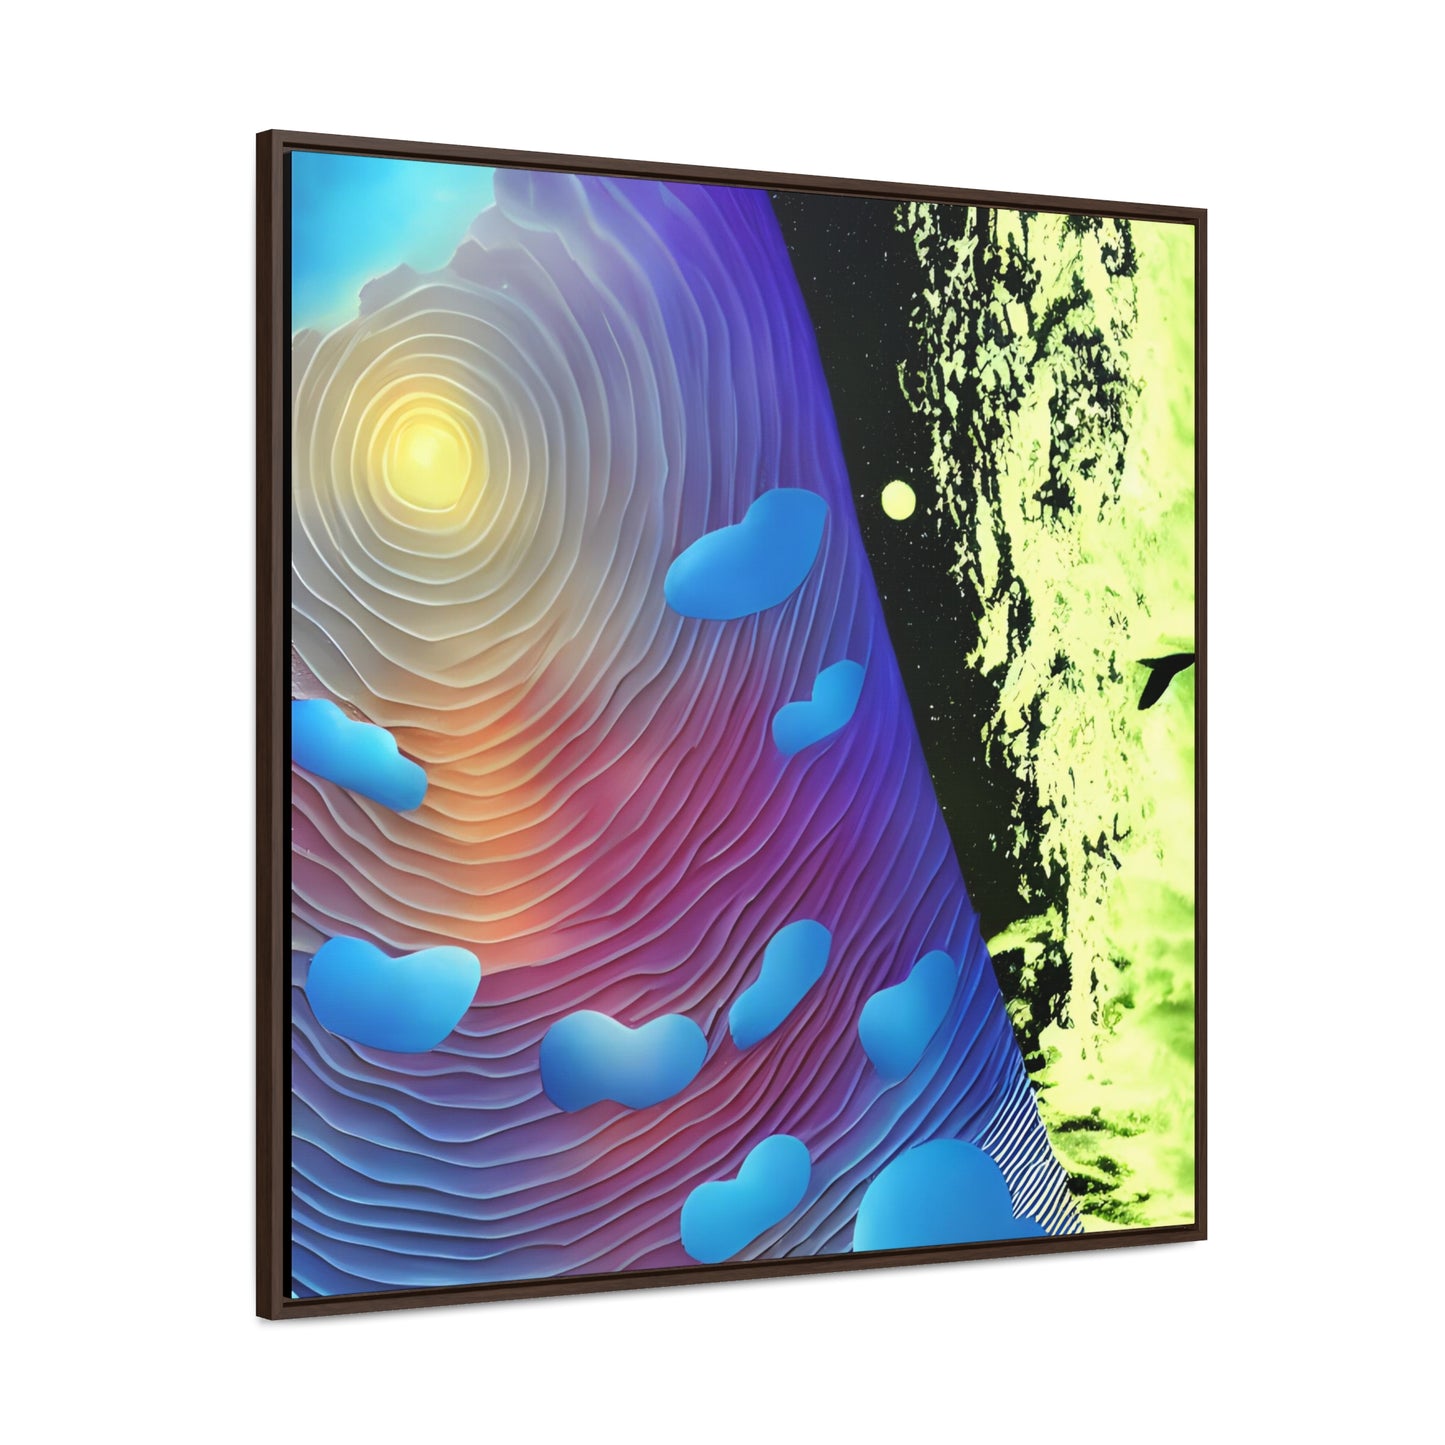 In The Clouds 01 - Framed Gallery Canvas